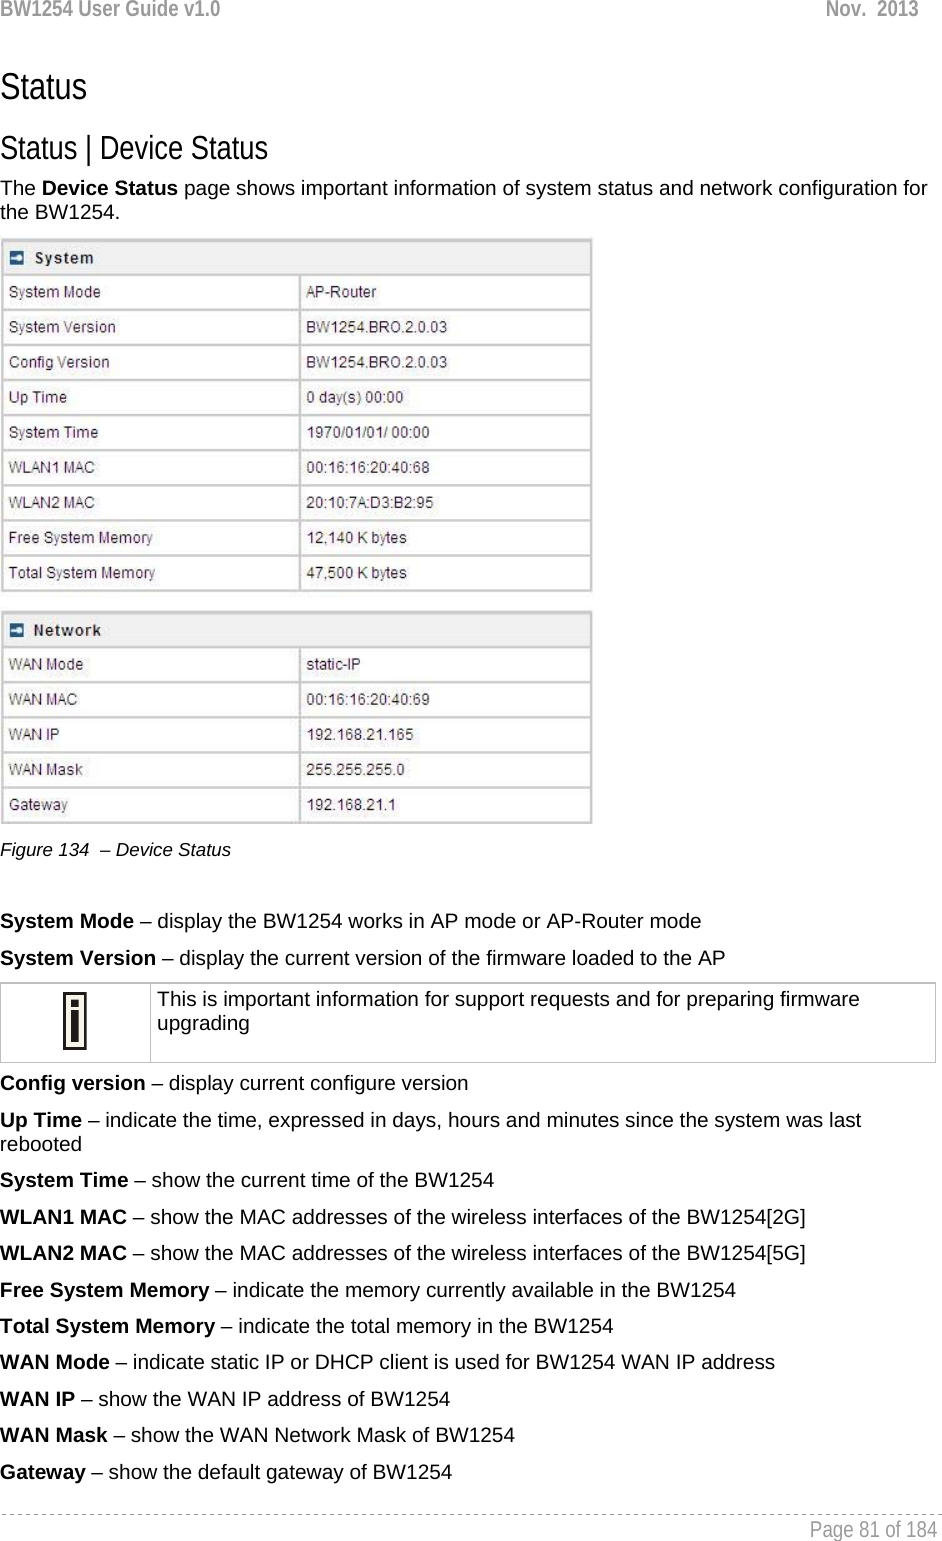 BW1254 User Guide v1.0  Nov.  2013     Page 81 of 184   Status Status | Device Status The Device Status page shows important information of system status and network configuration for the BW1254.  Figure 134  – Device Status  System Mode – display the BW1254 works in AP mode or AP-Router mode System Version – display the current version of the firmware loaded to the AP  This is important information for support requests and for preparing firmware upgrading Config version – display current configure version Up Time – indicate the time, expressed in days, hours and minutes since the system was last rebooted System Time – show the current time of the BW1254 WLAN1 MAC – show the MAC addresses of the wireless interfaces of the BW1254[2G] WLAN2 MAC – show the MAC addresses of the wireless interfaces of the BW1254[5G] Free System Memory – indicate the memory currently available in the BW1254 Total System Memory – indicate the total memory in the BW1254 WAN Mode – indicate static IP or DHCP client is used for BW1254 WAN IP address WAN IP – show the WAN IP address of BW1254 WAN Mask – show the WAN Network Mask of BW1254 Gateway – show the default gateway of BW1254 